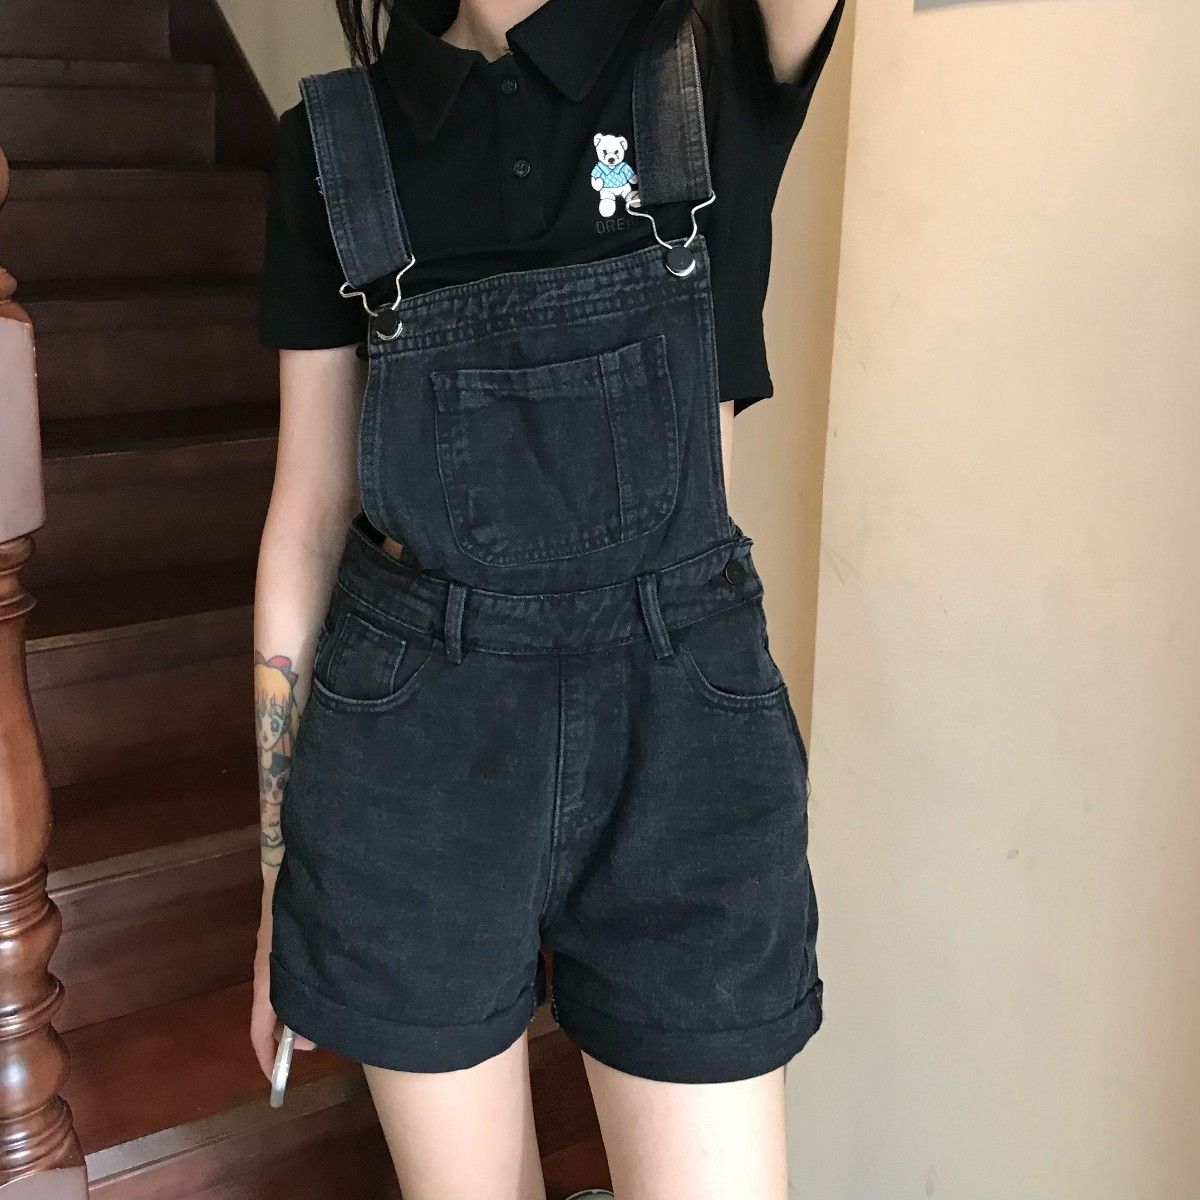 orachen | Your favorite overalls are here again, this time they are black shorts with rolled edges